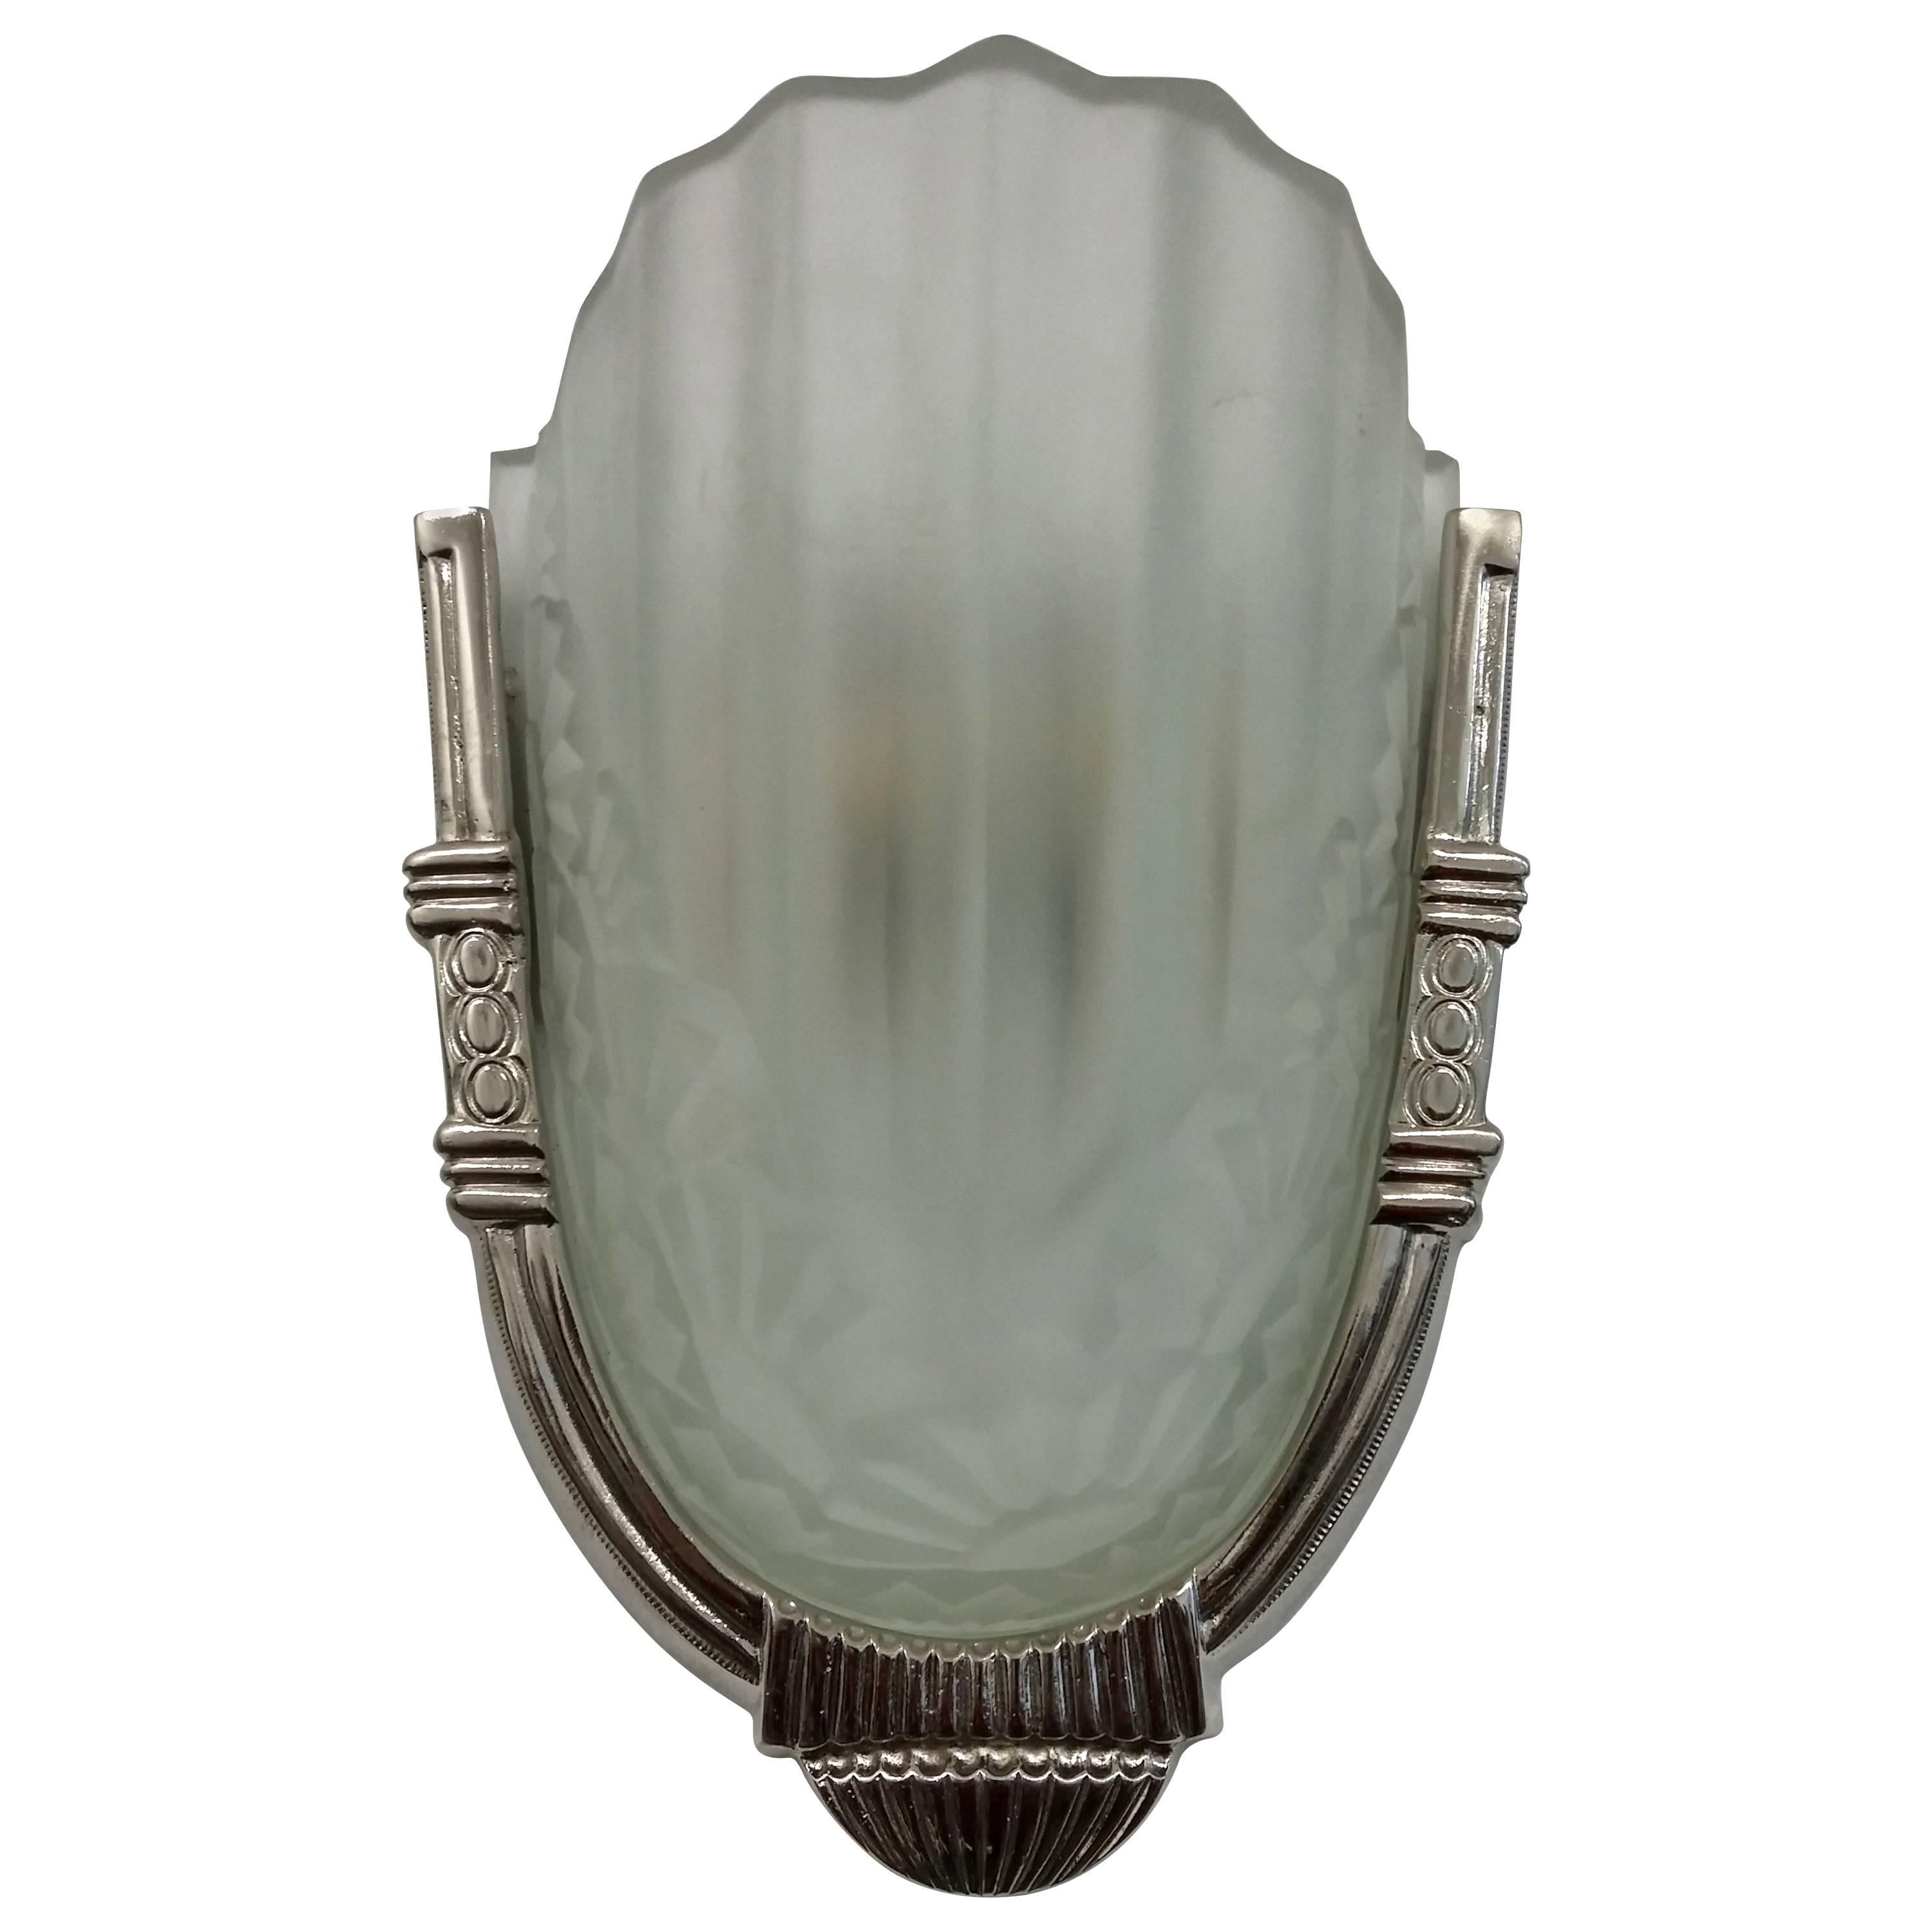 
A pair of French Art Deco wall sconces by the French artist 